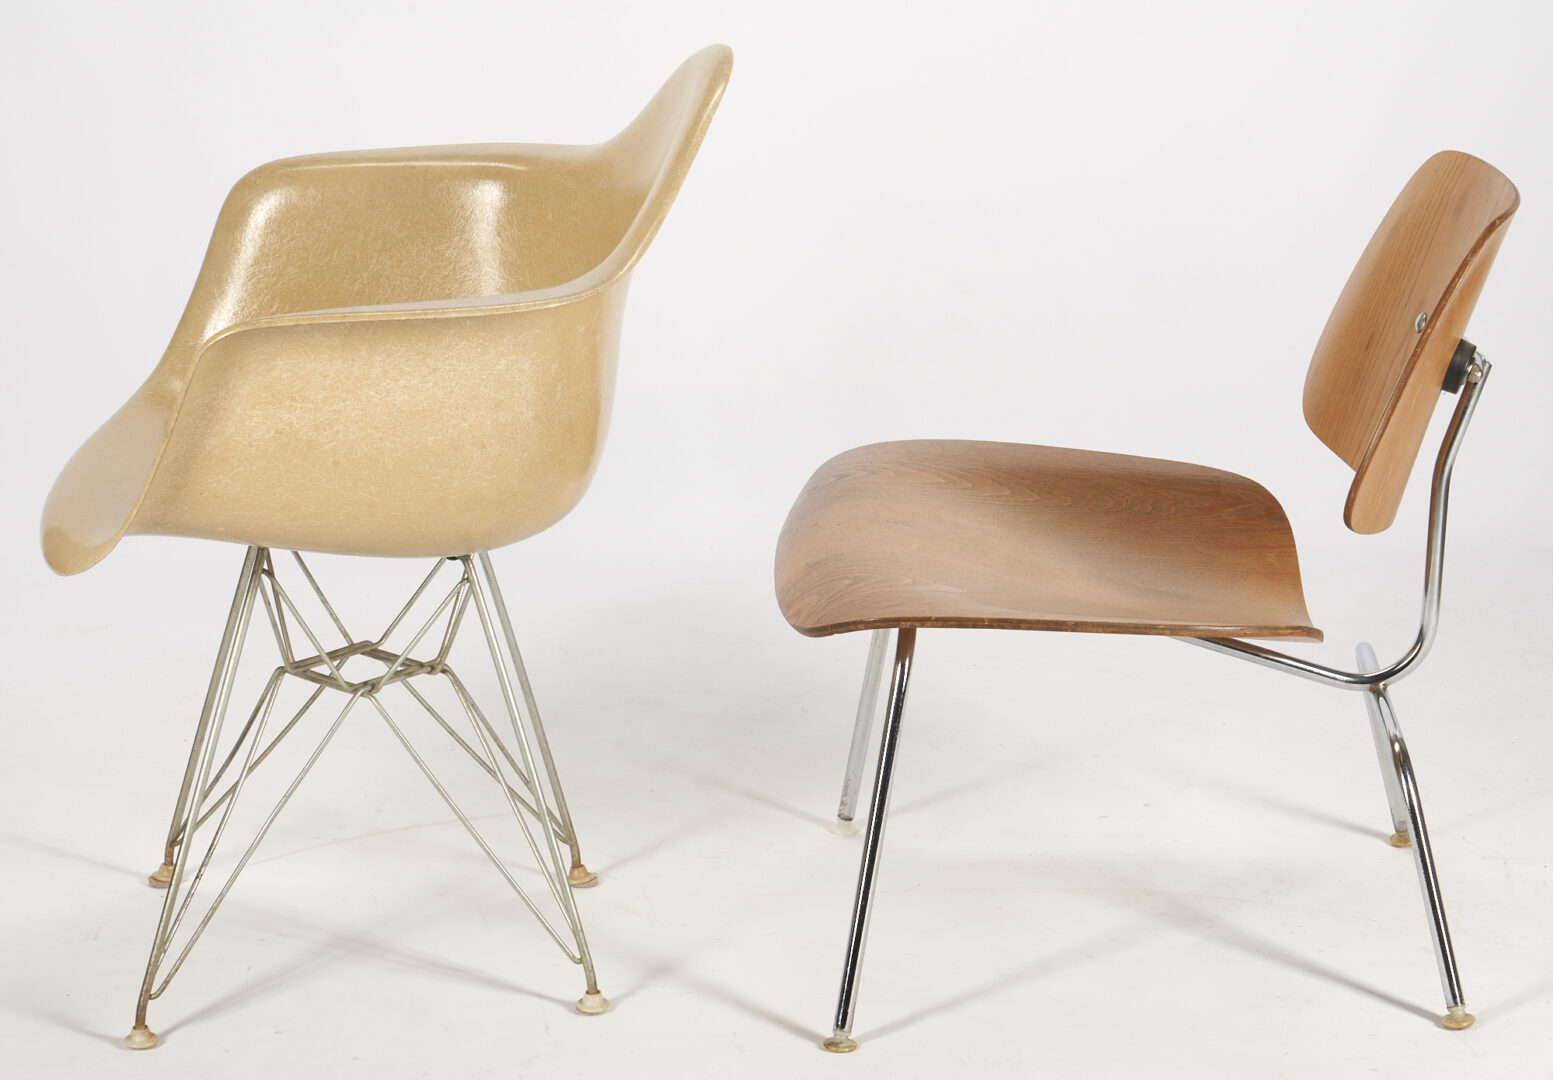 Lot 463: 2 Eames Mid-Century Chairs, Eiffel Fiberglass Shell & Molded Lounge Chair